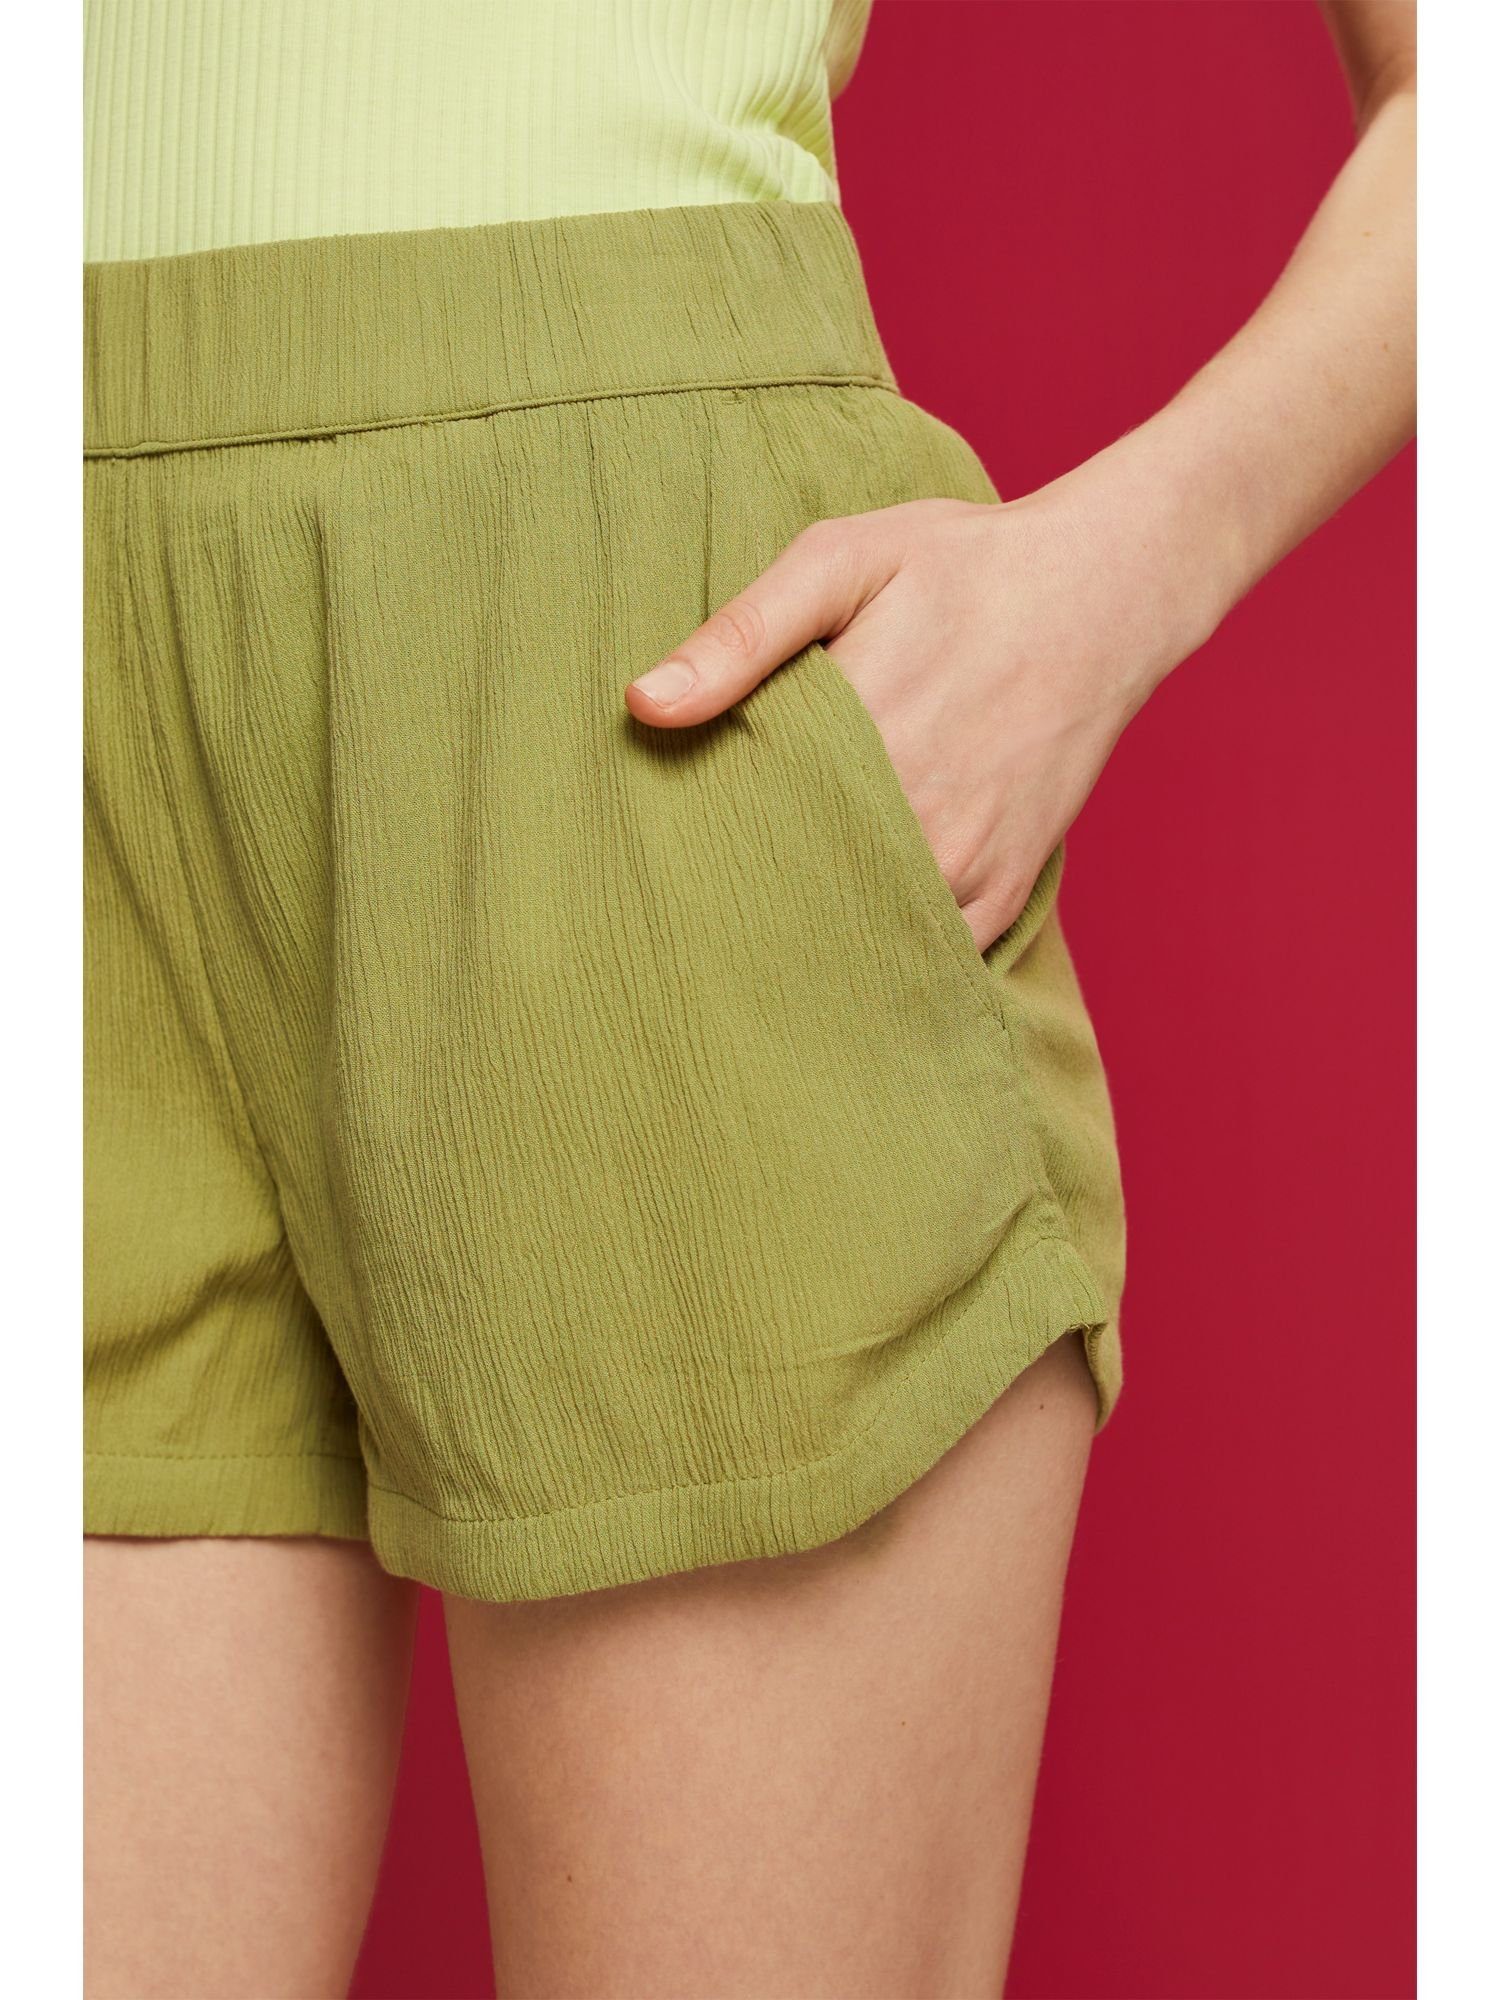 edc by Esprit aus GREEN Shorts (1-tlg) PISTACHIO Crinkle-Baumwolle Pull-on-Shorts